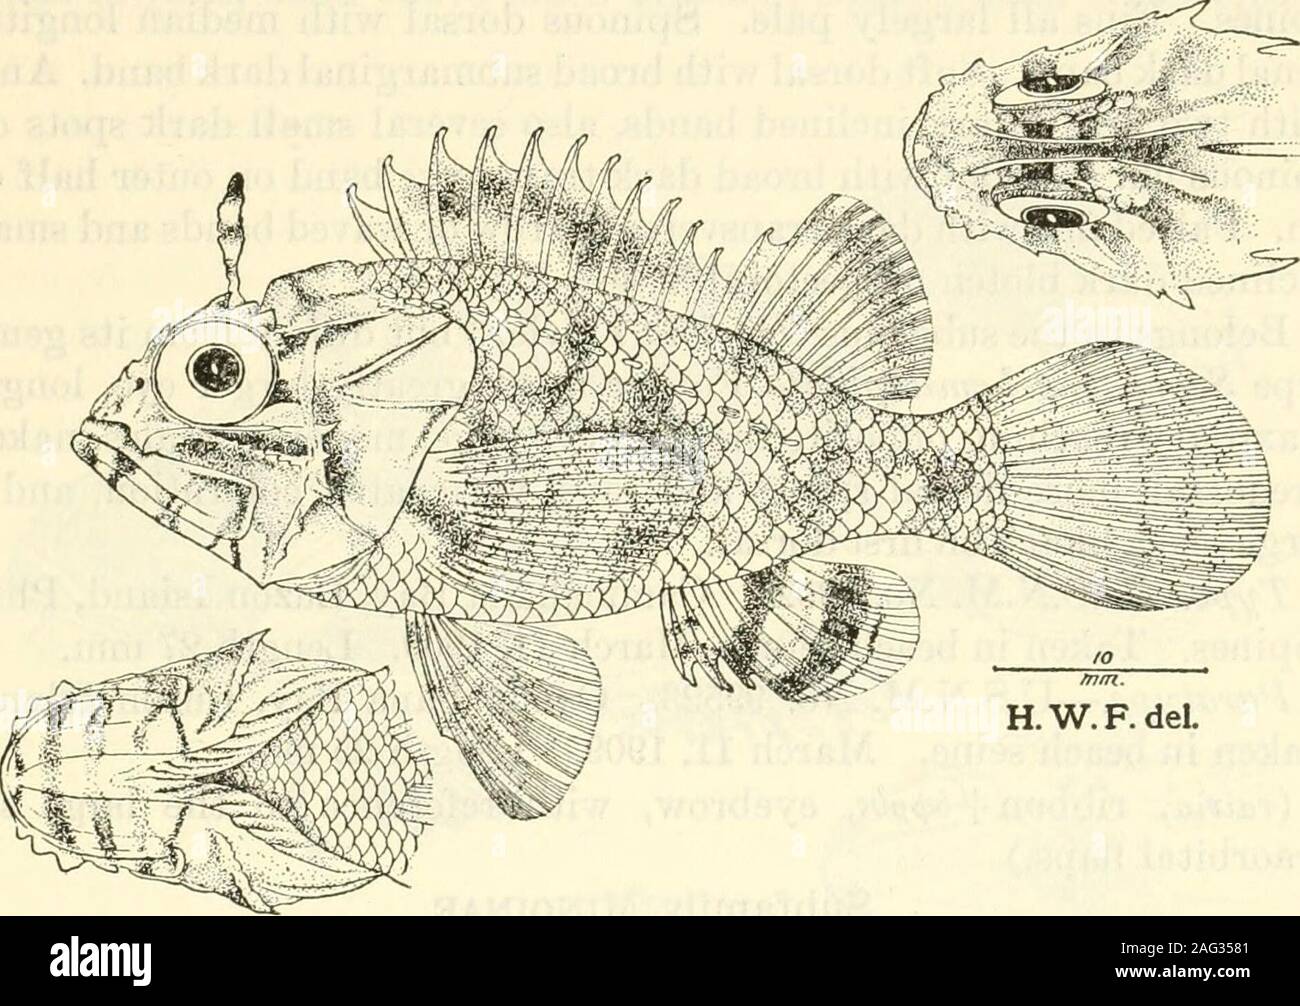 . Bulletin - United States National Museum. lity: Tanabe, Province ofKii) ; Figures and descriptions of the fishes of Japan, ed. 2, p. 507, pi. 137, fig 384 1935(type). ; Nat. V.tIi. Kon. Ak.ul. Wetens. Amsterdam (Cirrhit.), vol. 15, p. 16, 1875 (type locality:Amboina) : Atlas irhthyologique des Indes orientales N6erlandaises, vol. 8 p 147 pi 76flg. 1, 1876-77 (type). NEW PHILIPPINE FISHES—FOWLEK 67 truding in front; teeth in villiform bands in jaws, also present onpalatines; bony interorbital width 6% in head measured from snouttip, concave. Gill rakers 5 + 10, robust, short, clavate, % long Stock Photo